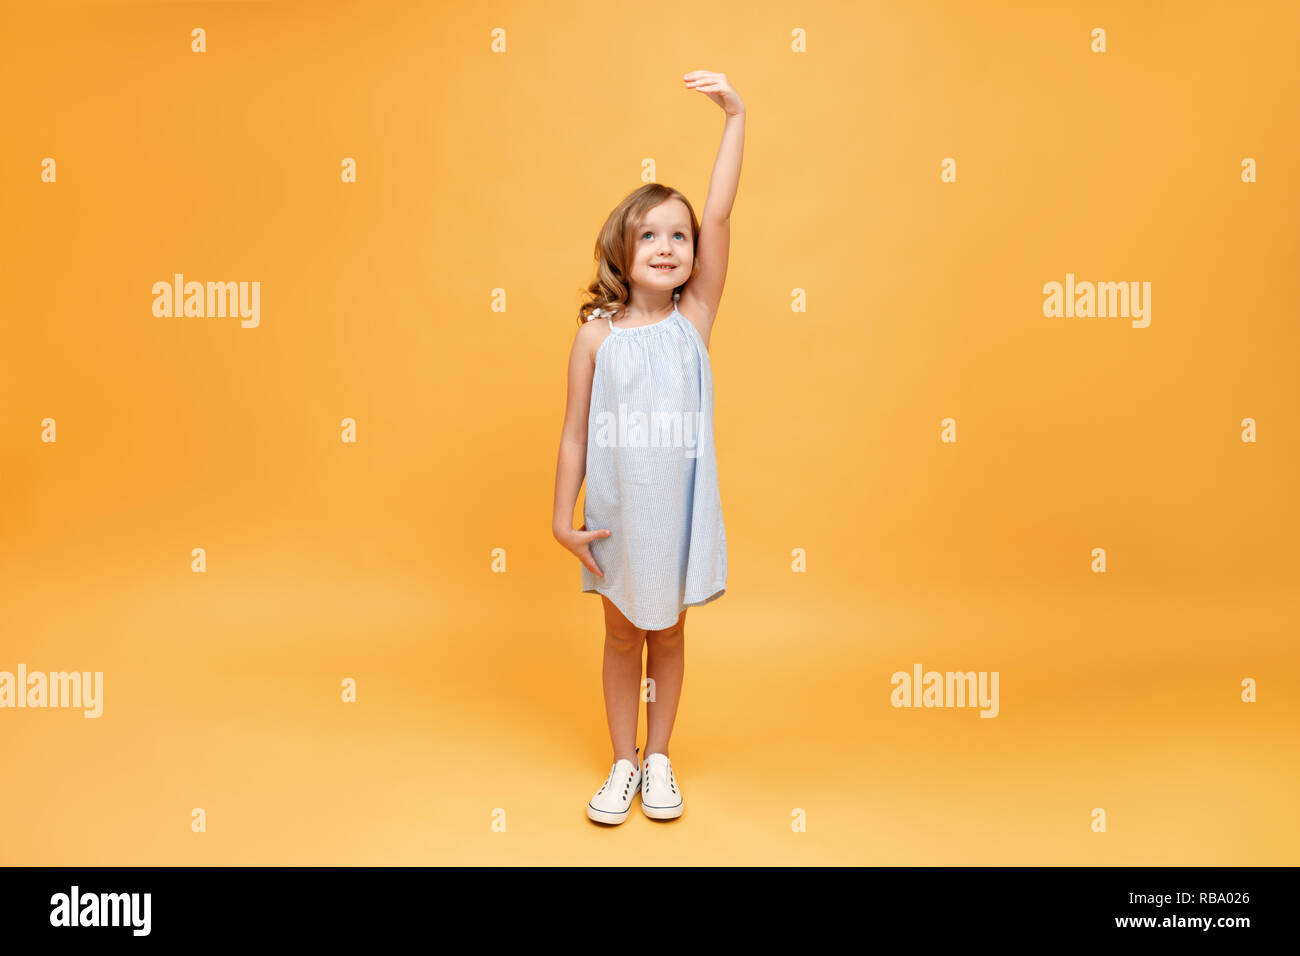 A little child measures her height on a yellow background. Concept of development, goal, success Stock Photo